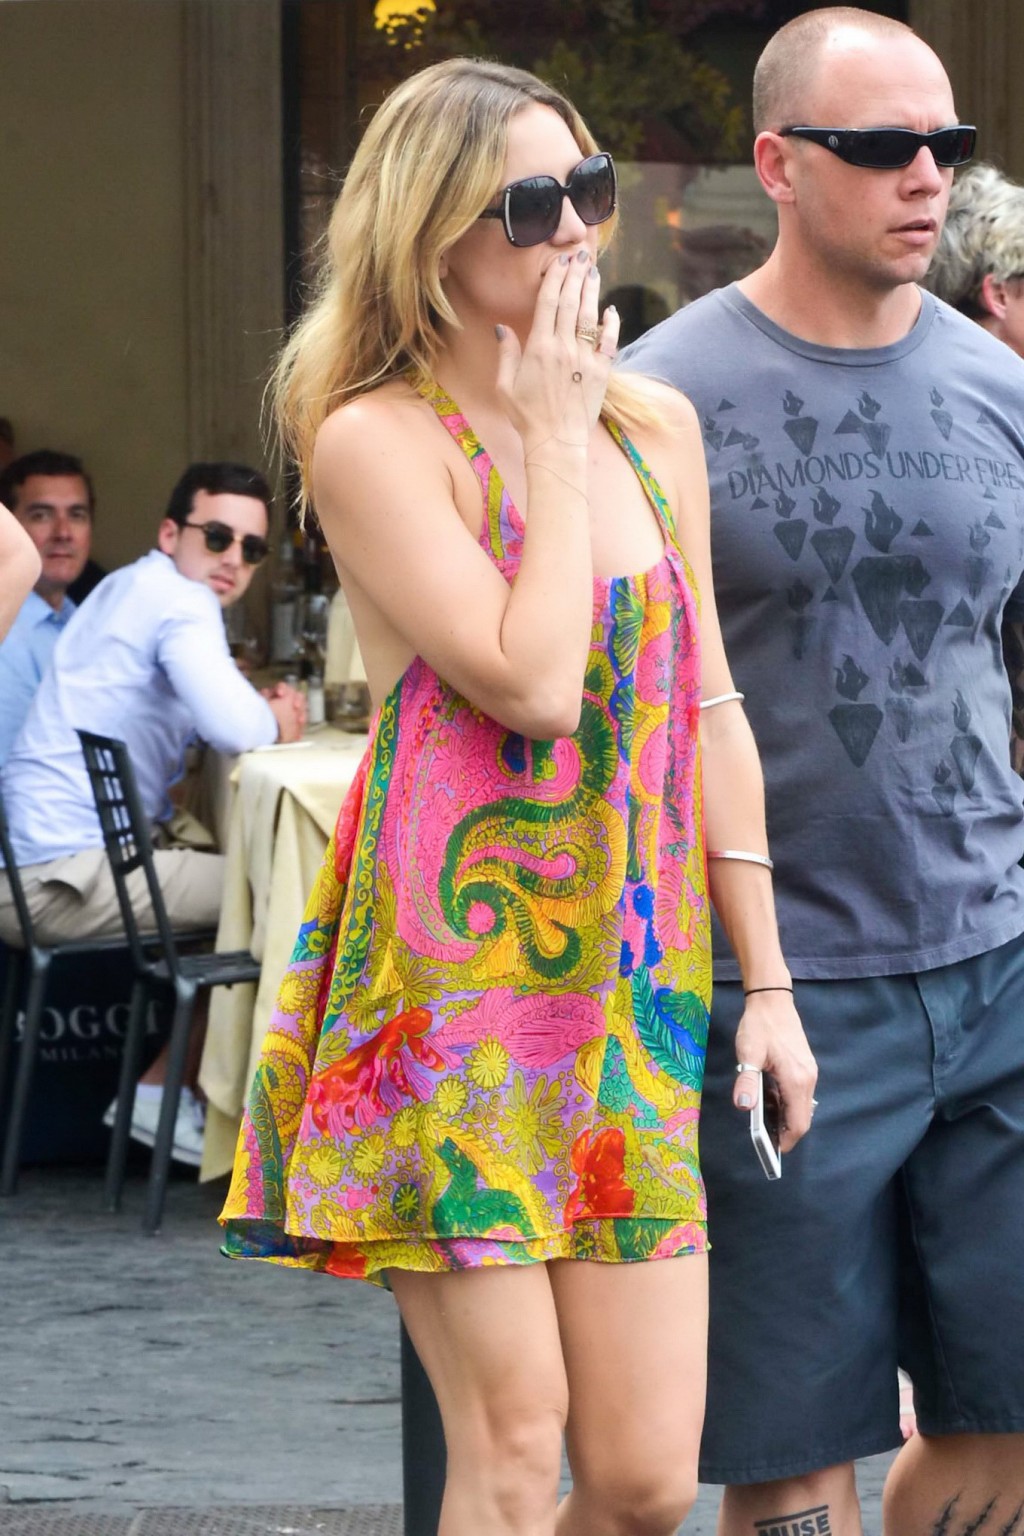 Kate Hudson braless wearing colorful bare back mini dress out in Rome #75225269